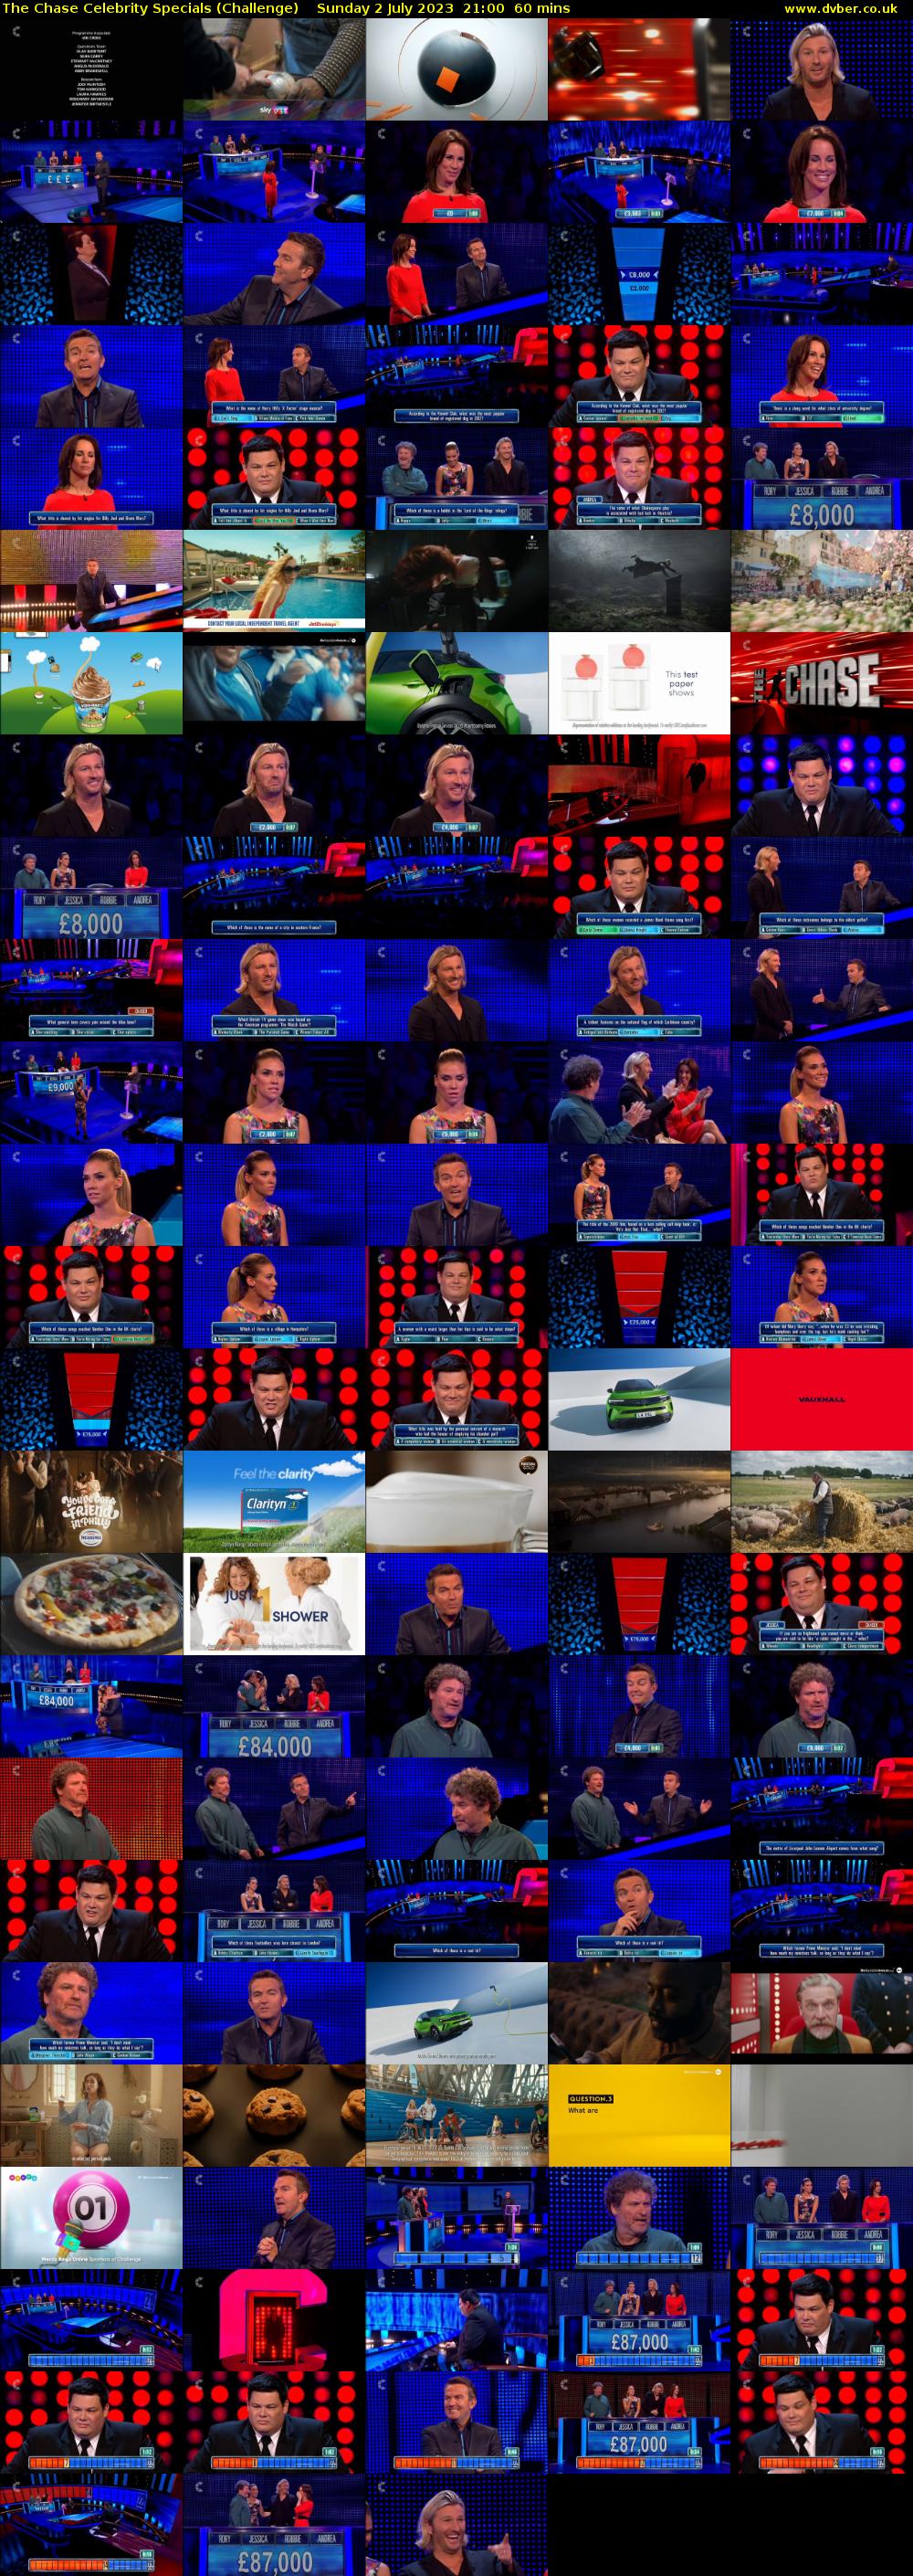 The Chase Celebrity Specials (Challenge) Sunday 2 July 2023 21:00 - 22:00